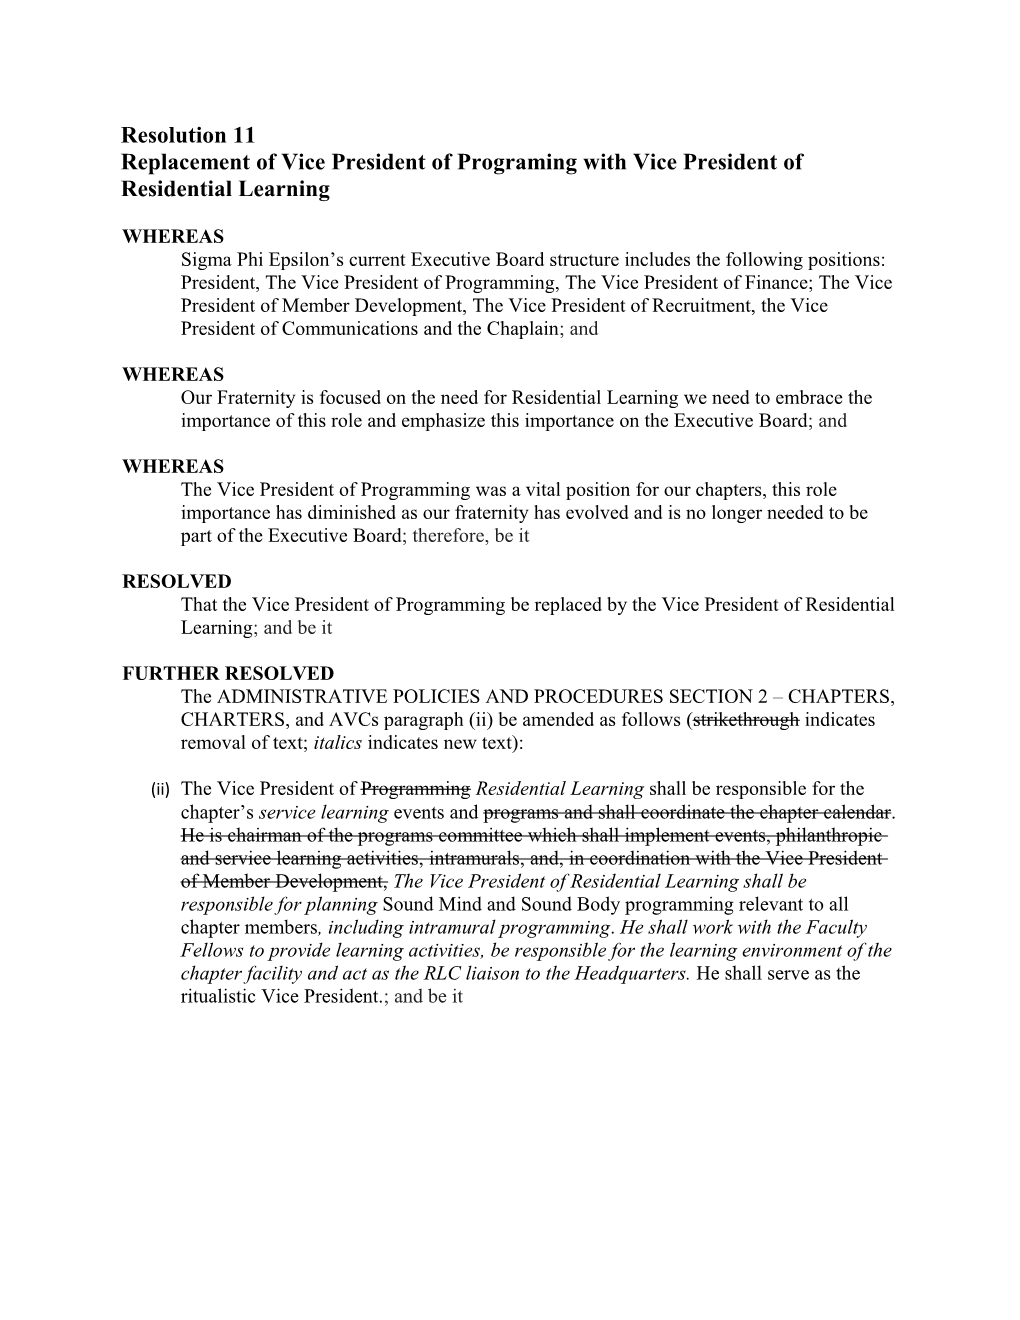 Replacement of Vice President of Programing with Vice President of Residential Learning